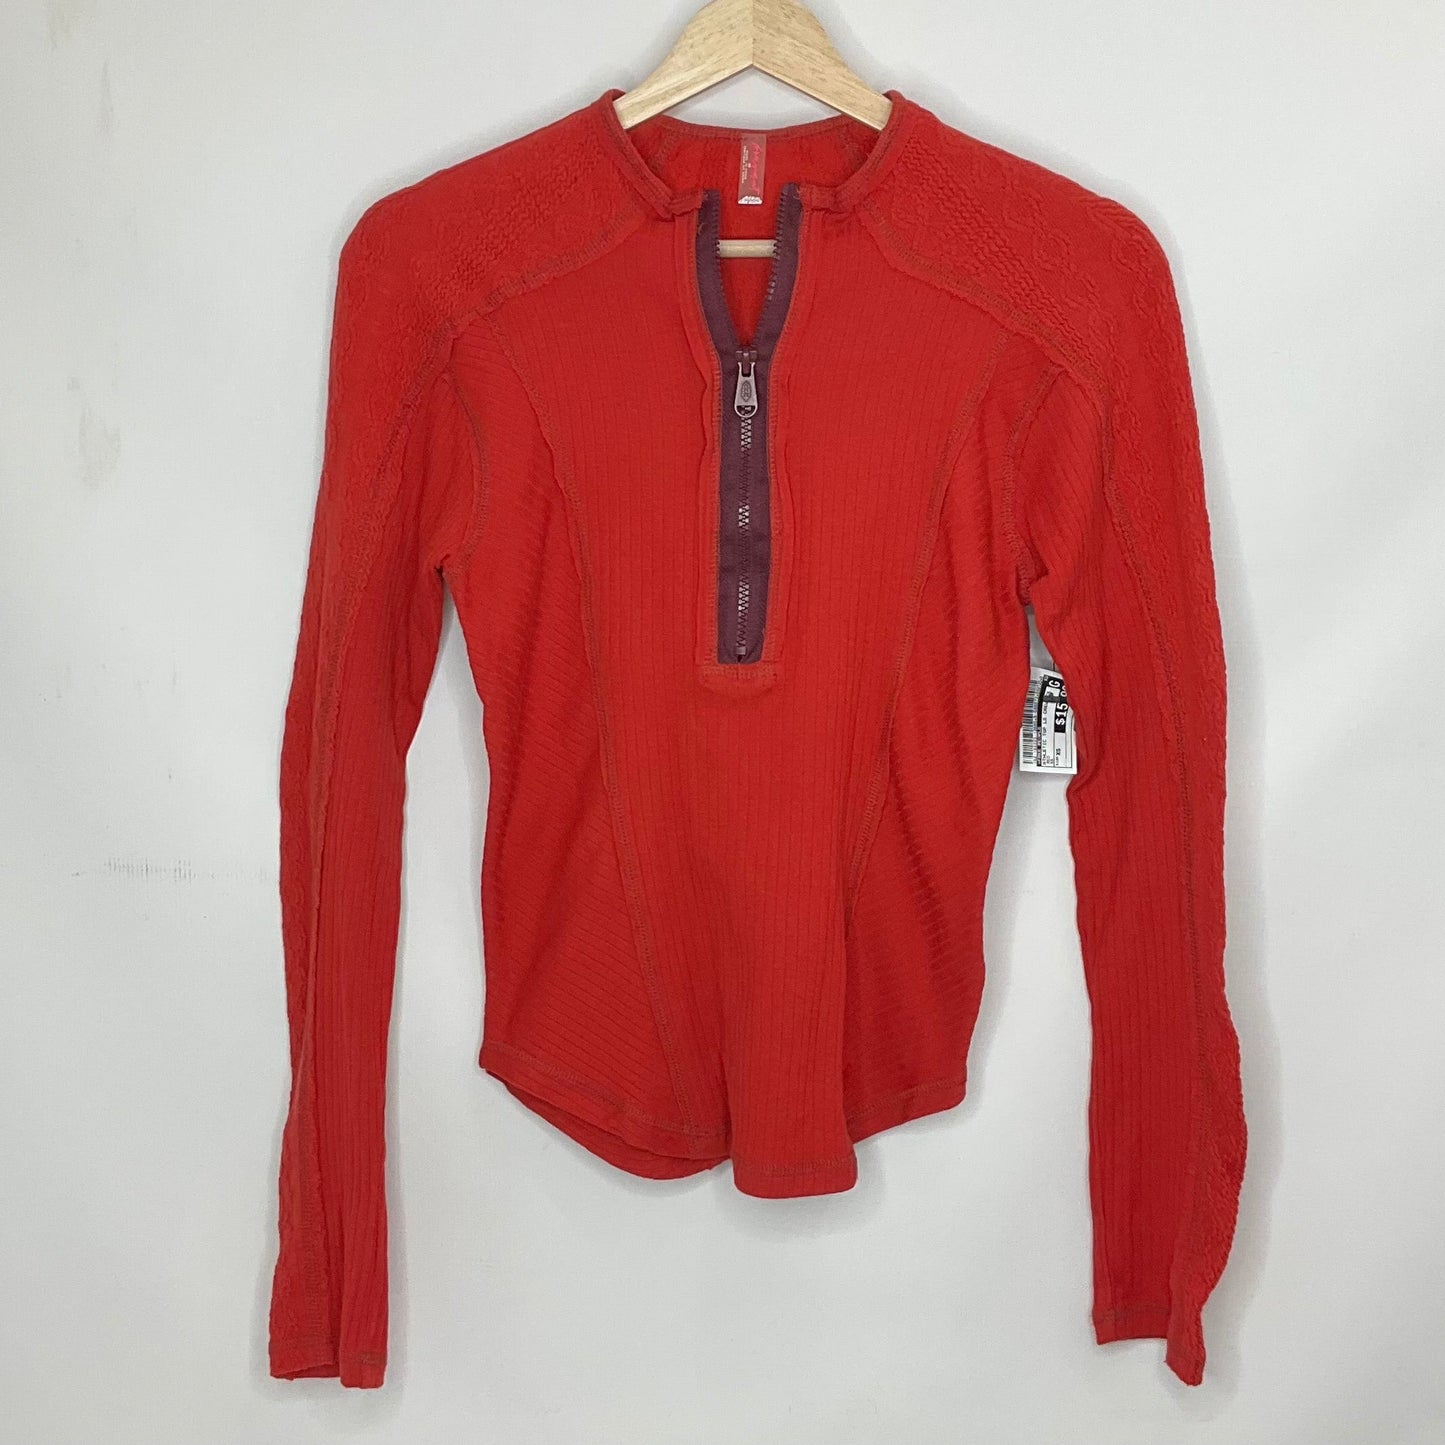 Red Athletic Top Long Sleeve Crewneck Free People, Size Xs